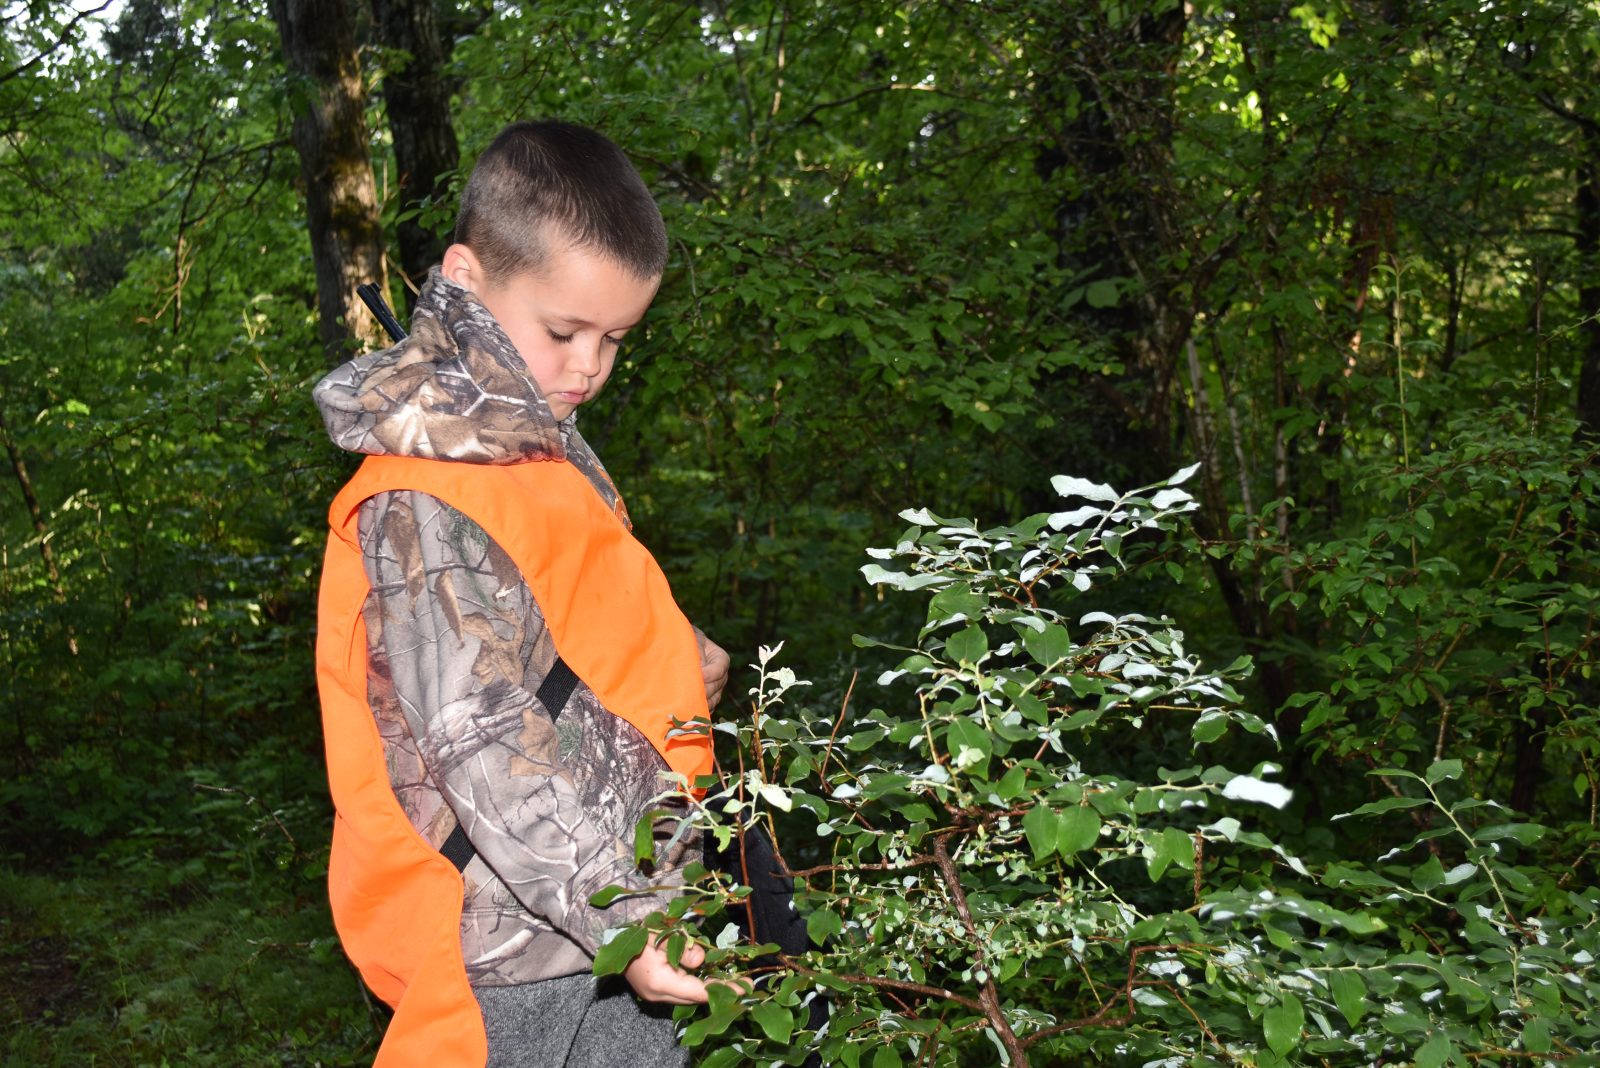 An image of a child in a camouflage jacket and orange visibility vest looking at a berry laden bush